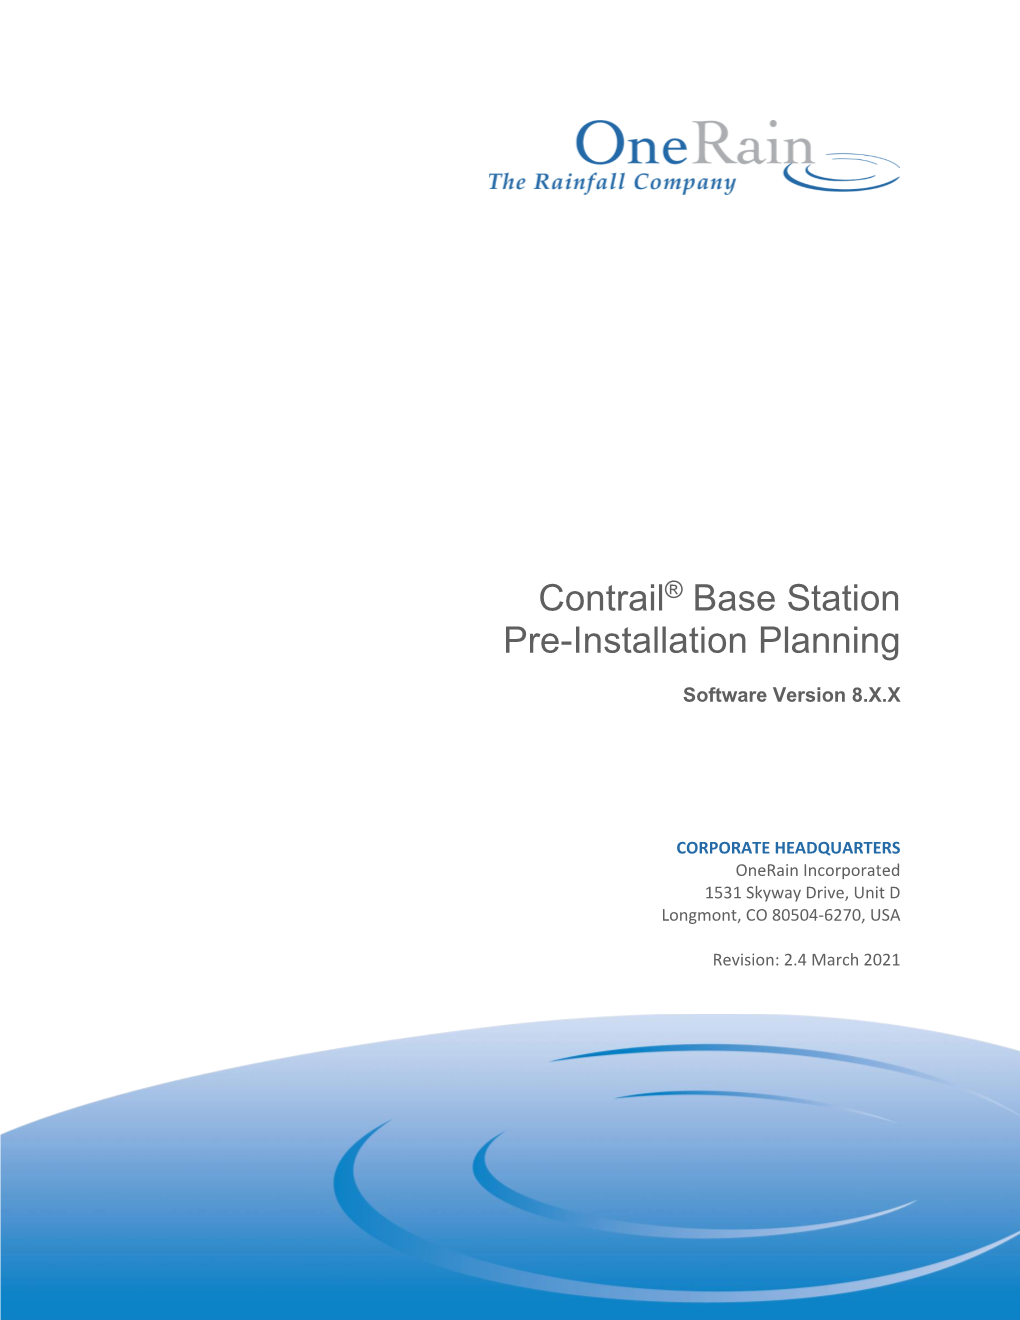 Contrail Base Station Pre-Installation Planning